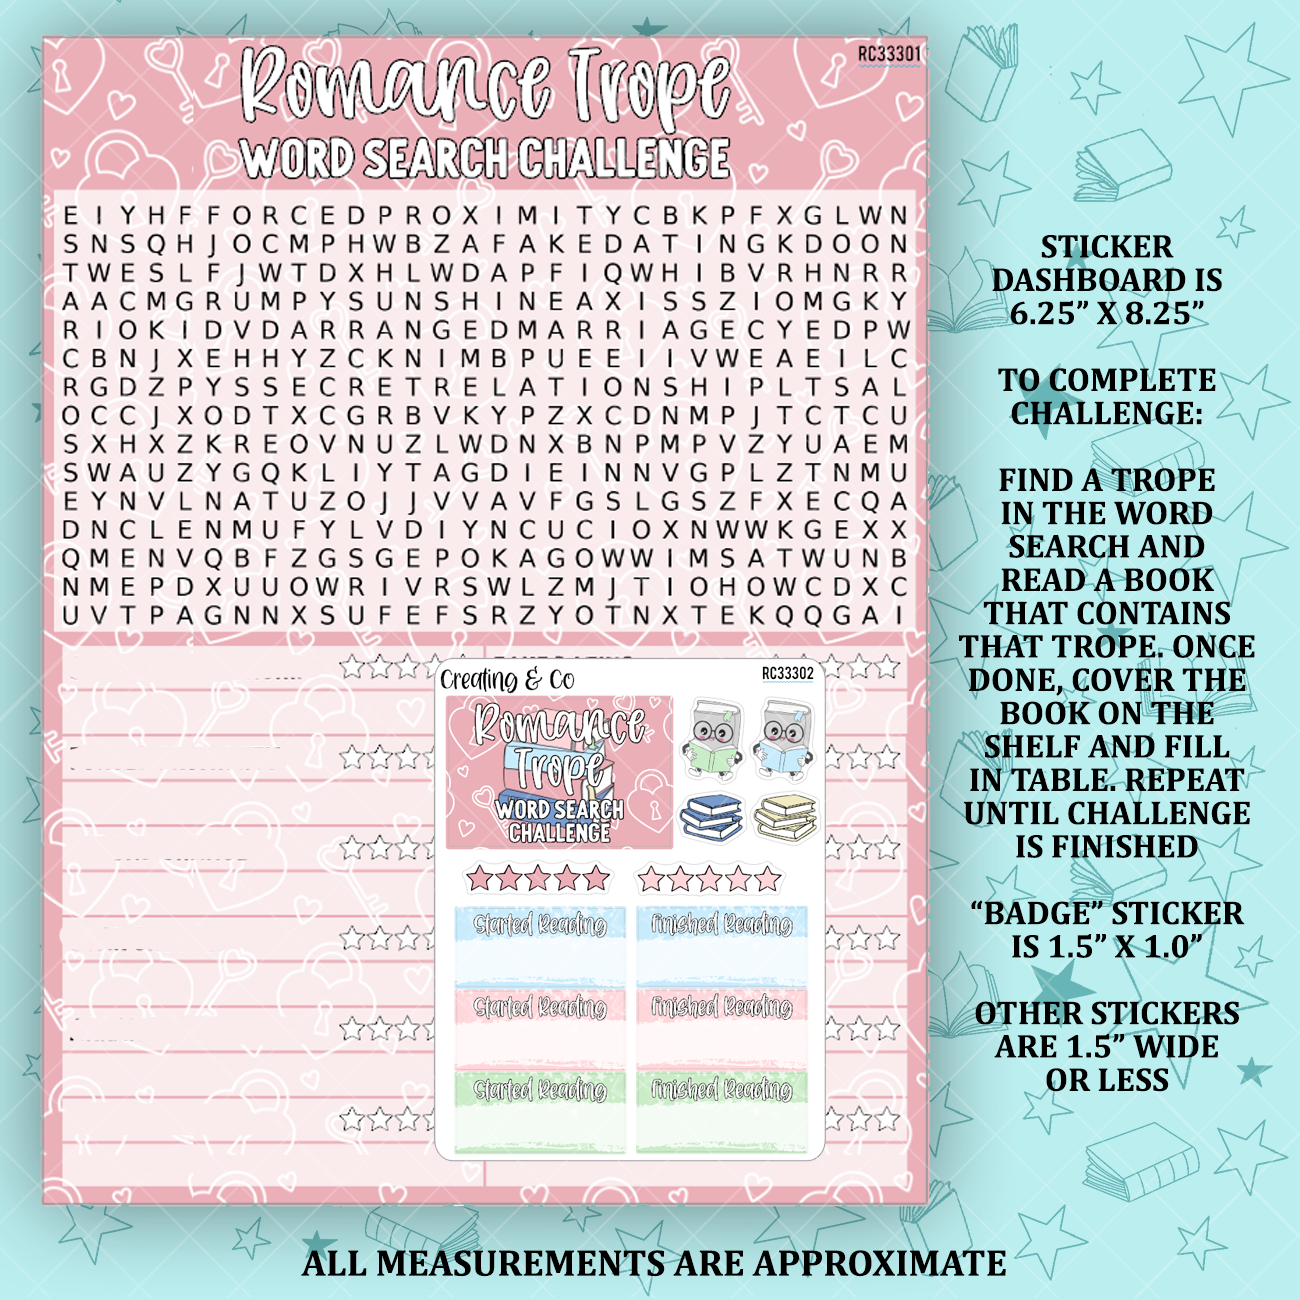 Romance Trope Word Search Reading Challenge Dashboard and Sticker Trackers for 7x9 Planners - RC333